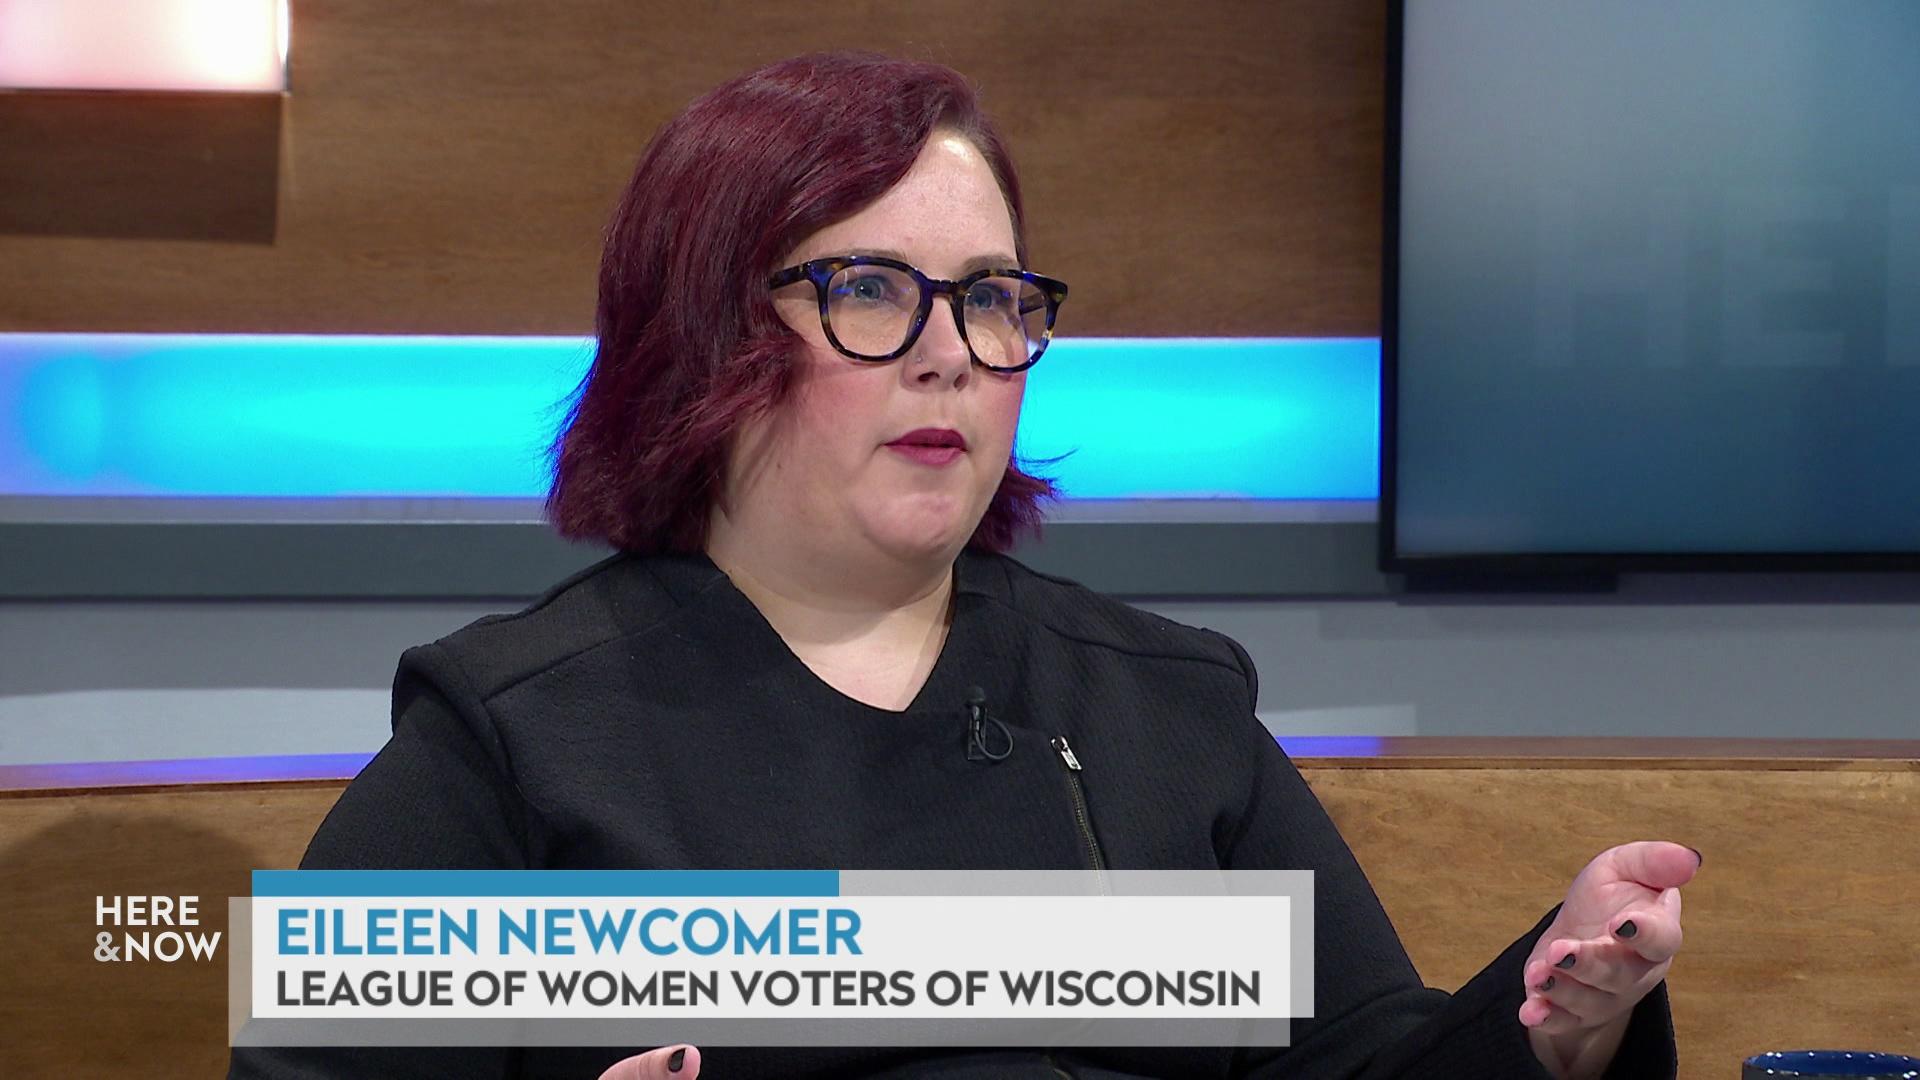 A still image shows Eileen Newcomer seated at the 'Here & Now' set featuring wood paneling, with a graphic at bottom reading 'Eileen Newcomer' and 'League of Women Voters of Wisconsin.'